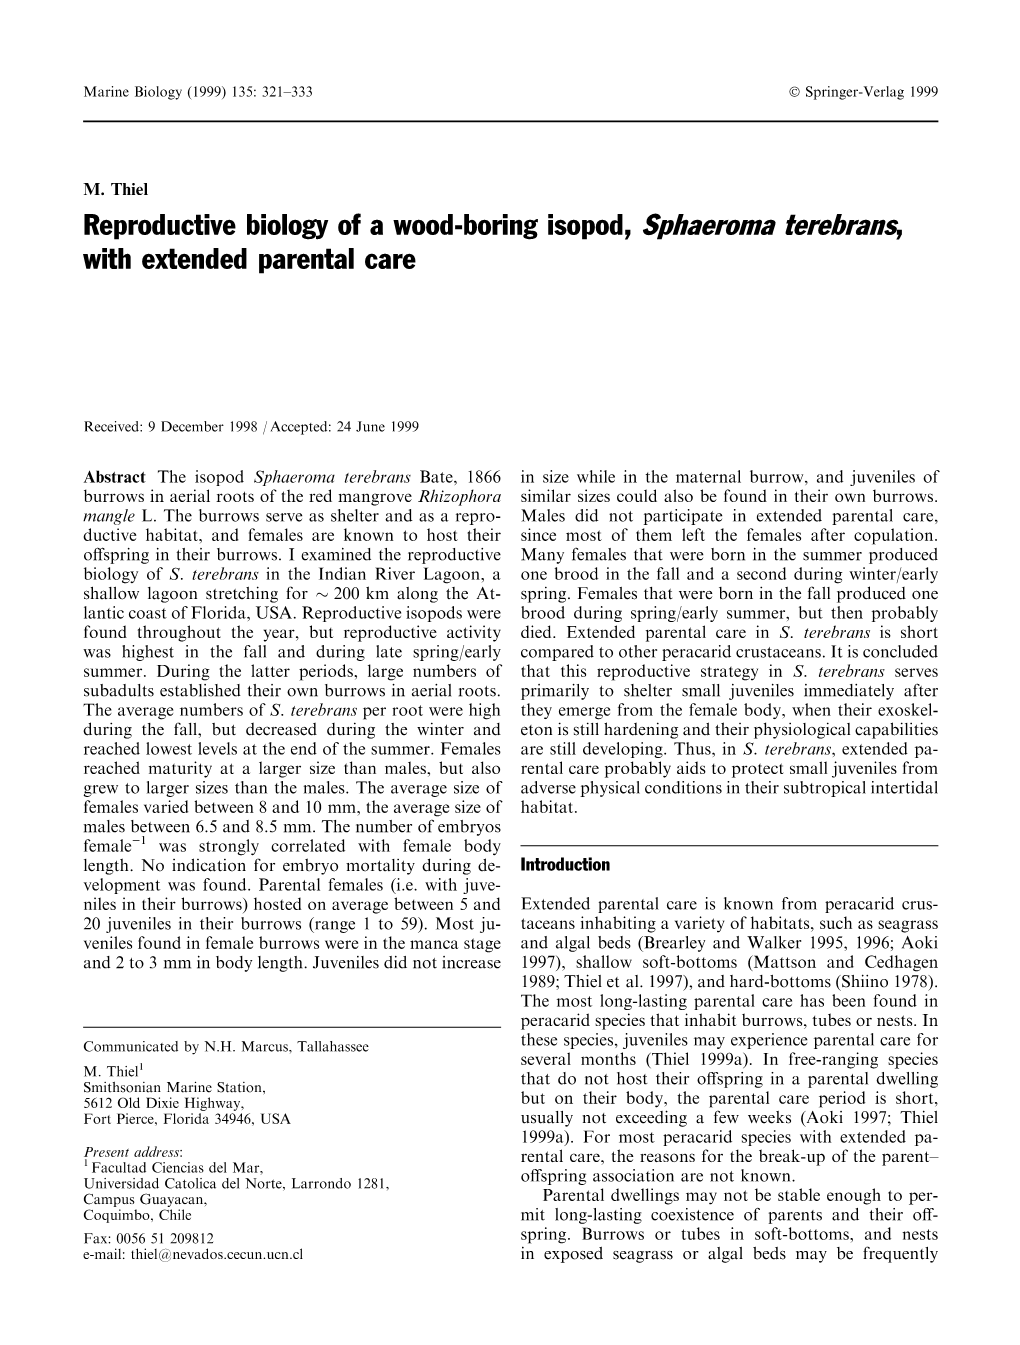 Reproductive Biology of a Wood-Boring Isopod, Sphaeroma Terebrans, with Extended Parental Care